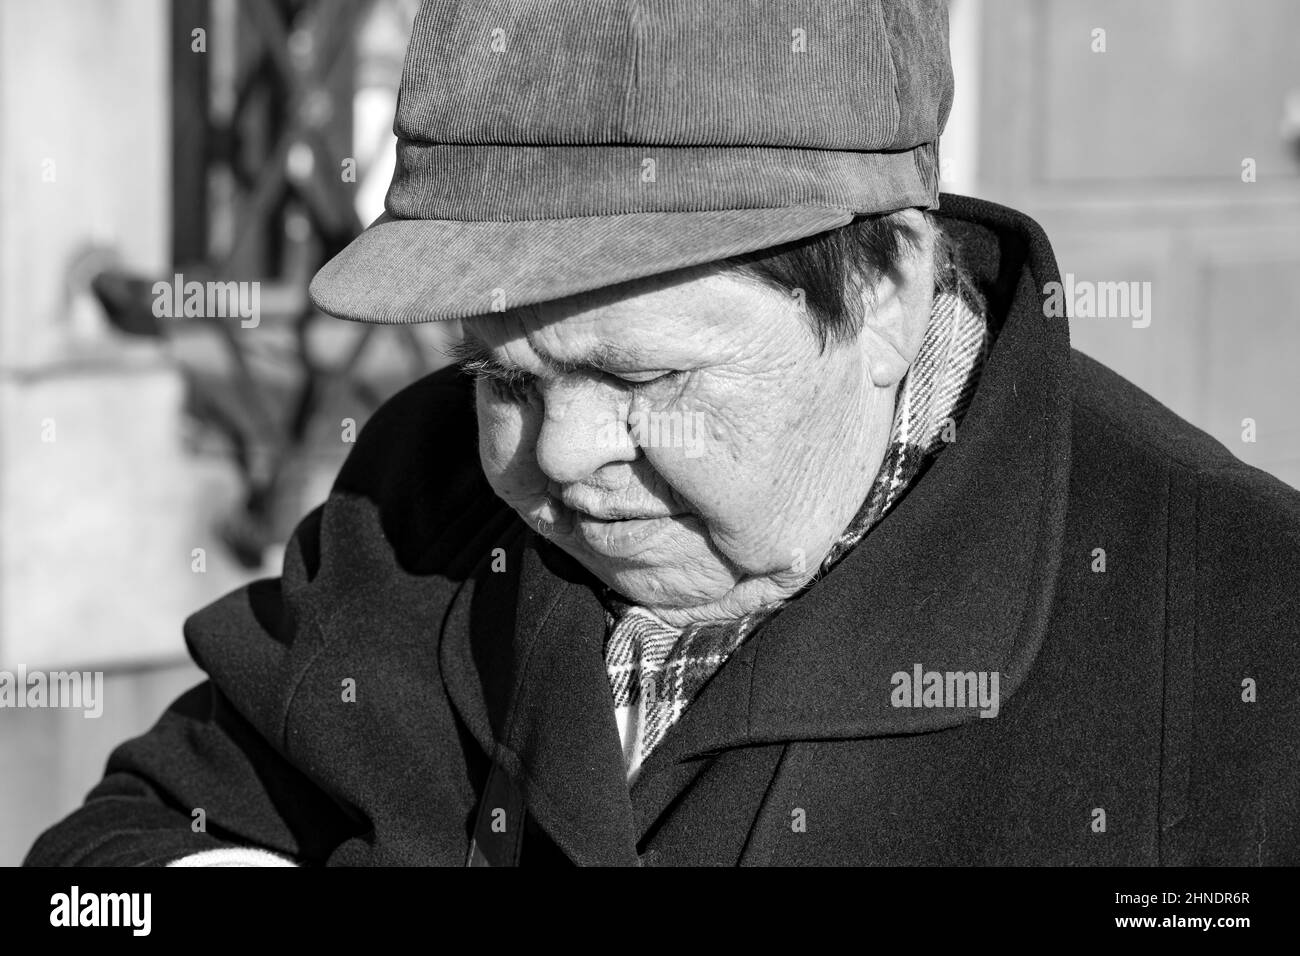 Poznan, Poland - A pensioner, the face of an elderly woman in a cap and coat. Sharp make-up. Stock Photo